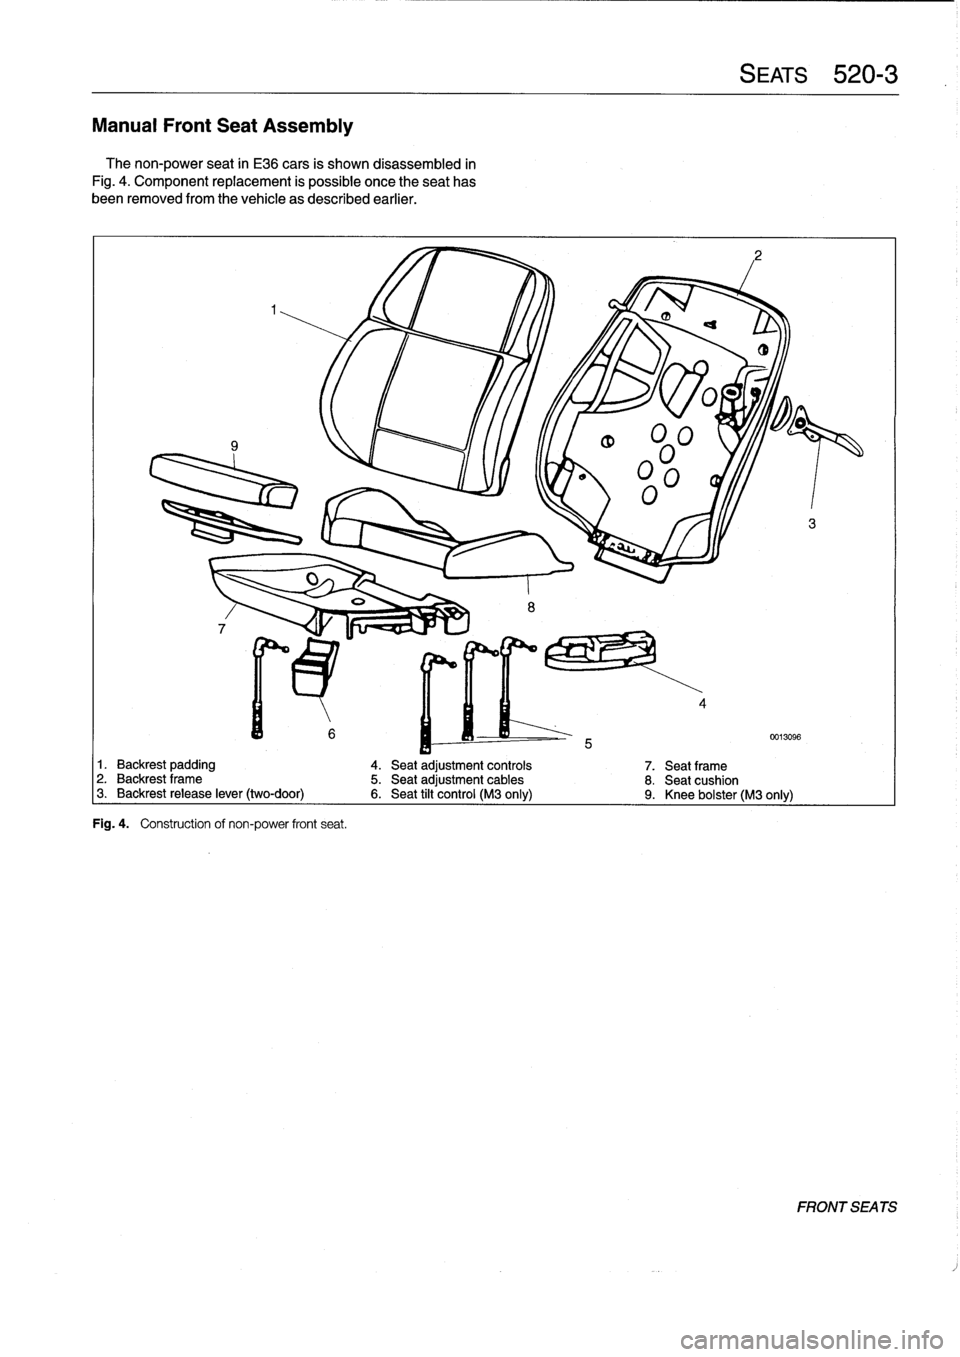 BMW 328i 1994 E36 Workshop Manual 
Manual
Front
Seat
Assembly

The
non-power
seat
in
E36
cars
is
shown
disassembled
in

Fig
.
4
.
Component
replacement
is
possible
once
theseat
has

been
removed
from
the
vehicle
as
described
earlier
.